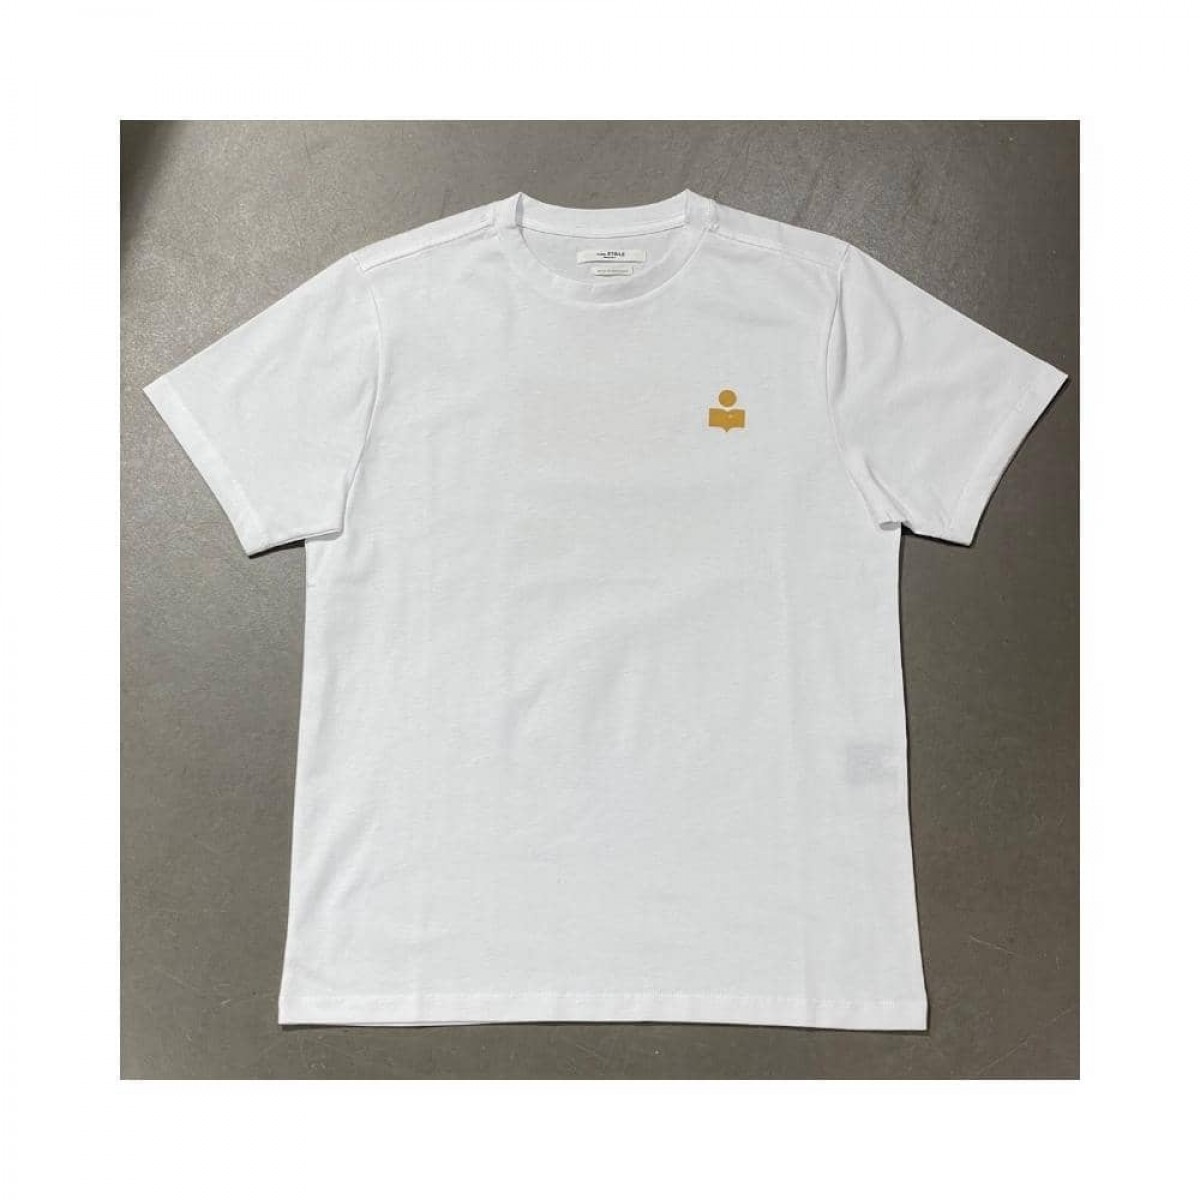 zewel t-shirt - white with ochre - front